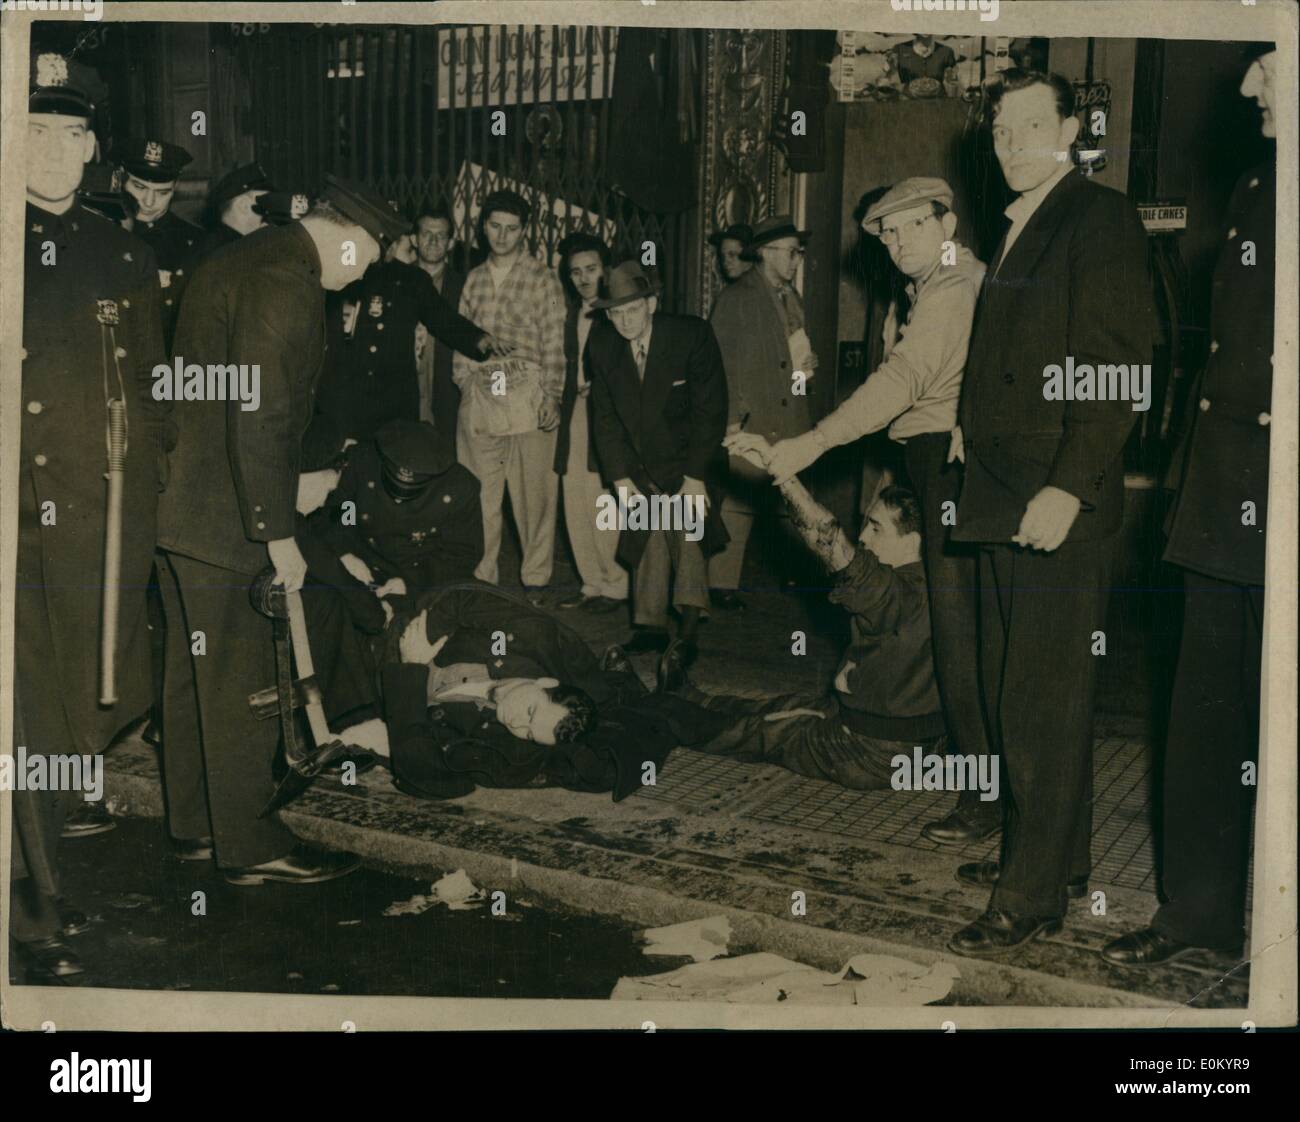 Dec. 12, 1952 - New York cops in gun battle. Seven including by stander injured: Two men, Charles Mason and Richard Linwquist got into a fight outside a bar at 675 Eight Avenue, New York, recently. Two cops arrived to break it up and a moment later Clarence Sims, a Cleveland desperado and Cecil Johnson drove up with the intention of staging a stick up at the bar. Patrolman George Mcauliffe arrived and hearing that Sims was armed backedhim against the well. The arrival of two more patrolman Knox and Conlon, diverted McAuliffe with three slugs, drawing at .45 dropped McAuliffe with three slugs Stock Photo